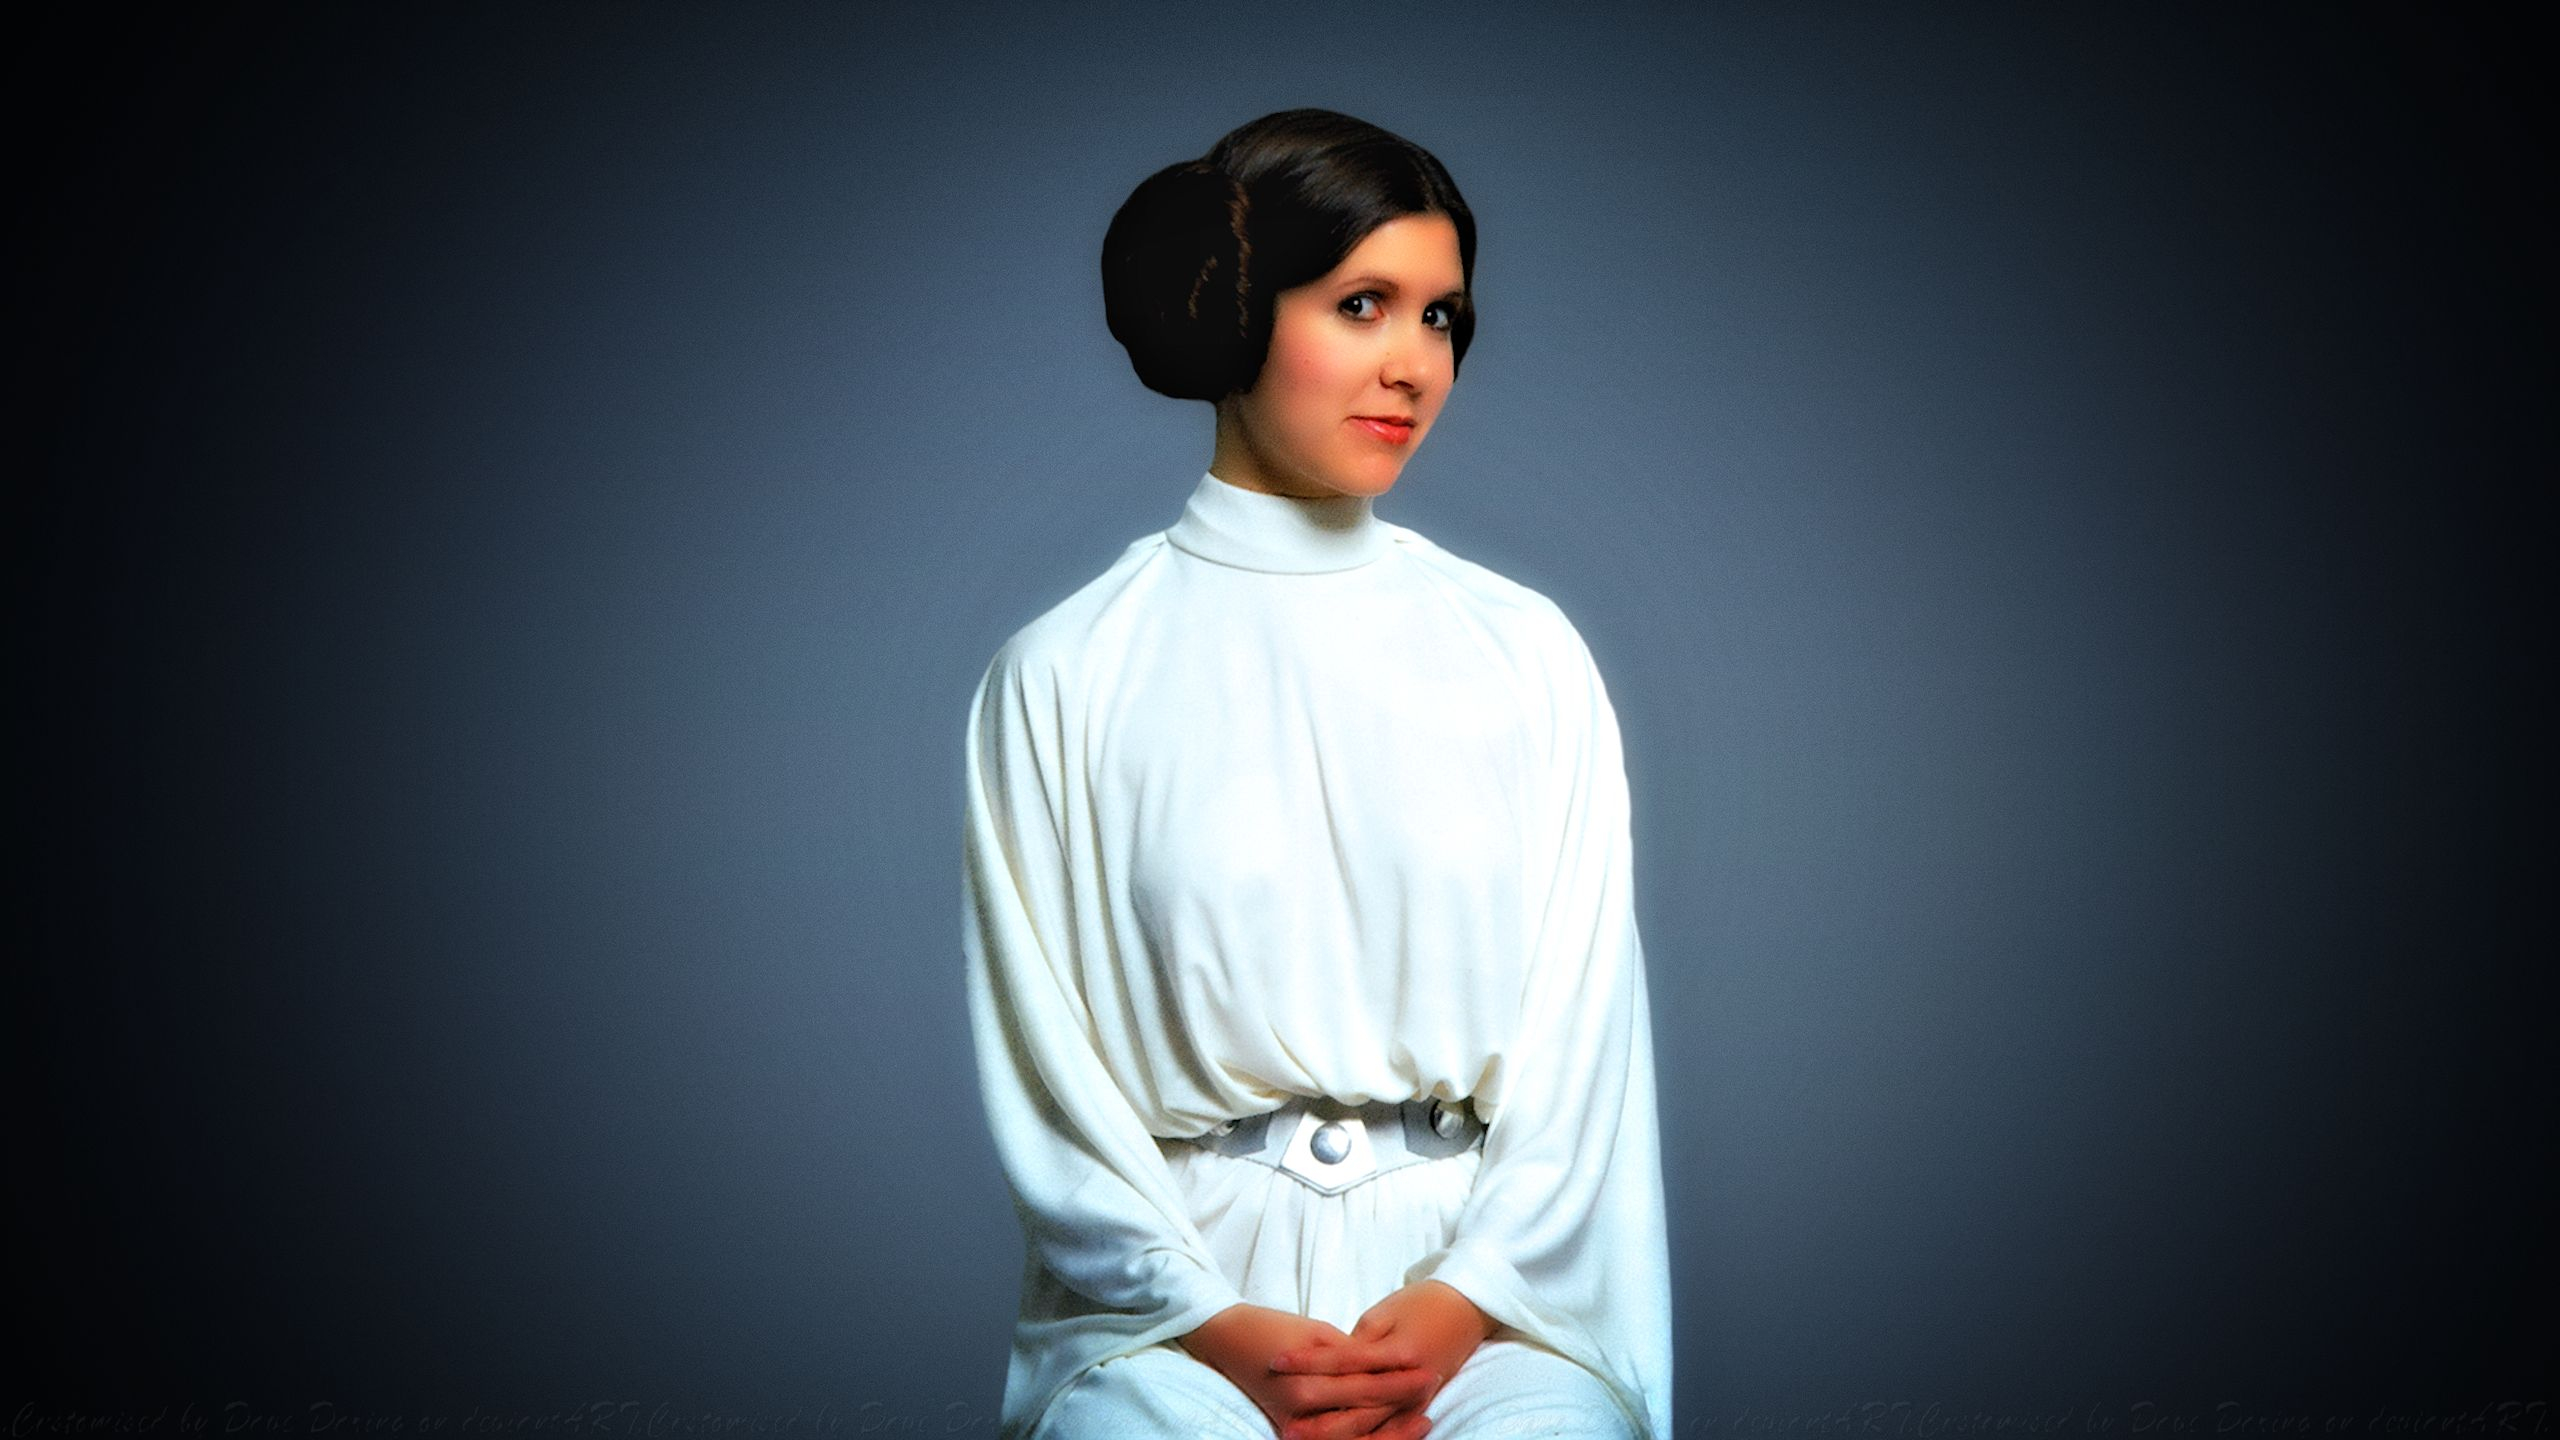 2560x1440 60+ Princess Leia HD Wallpapers and Backgrounds